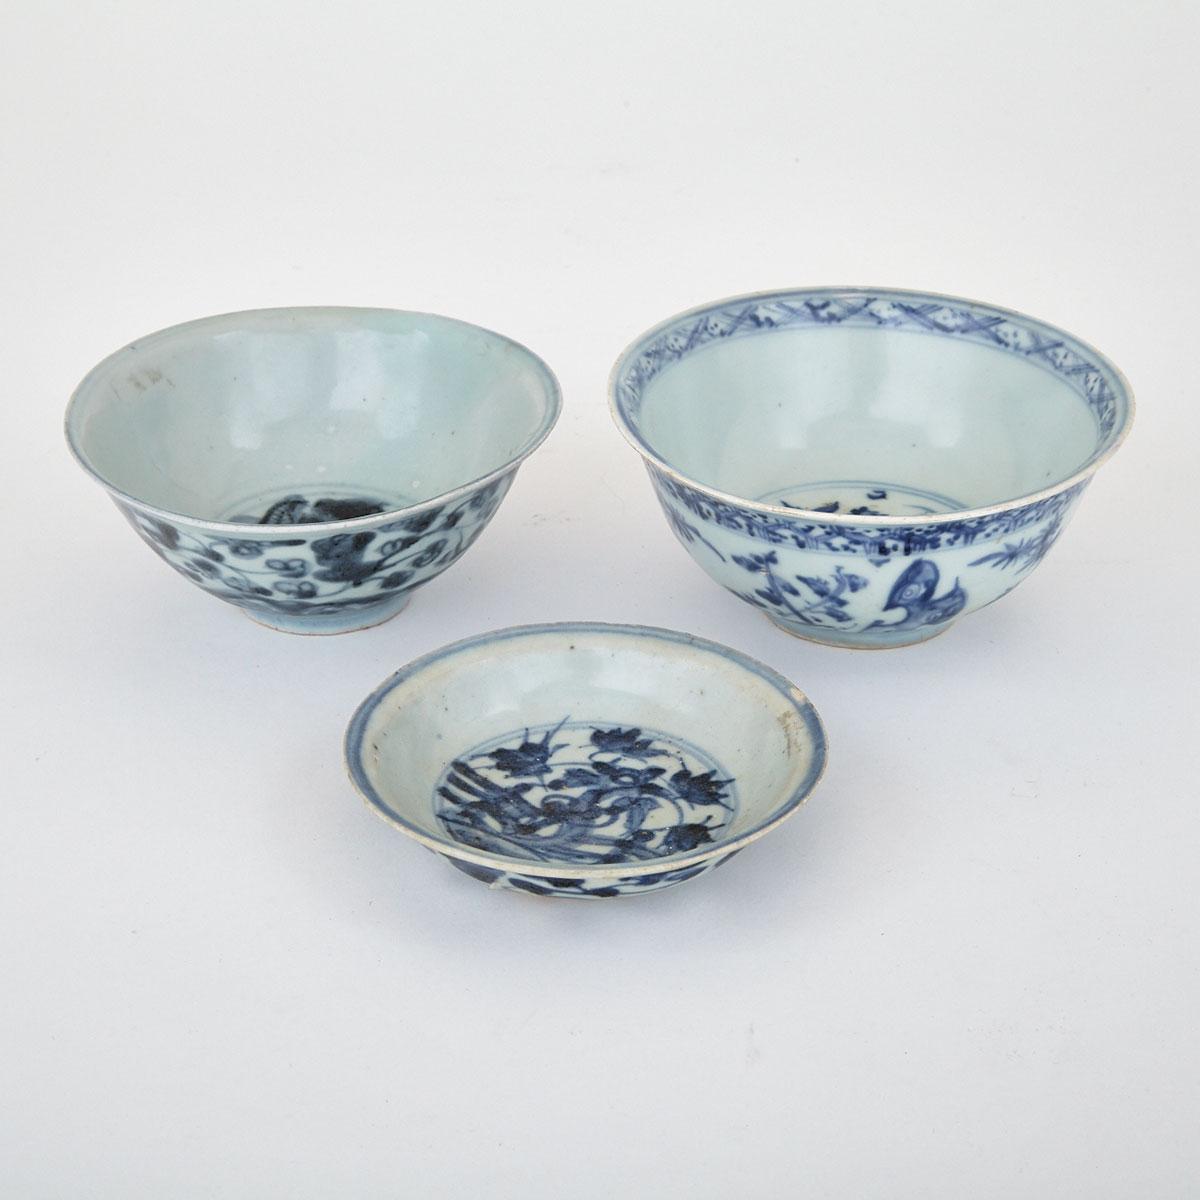 Three Blue and White Porcelain Wares, Ming Dynasty, 16th Century